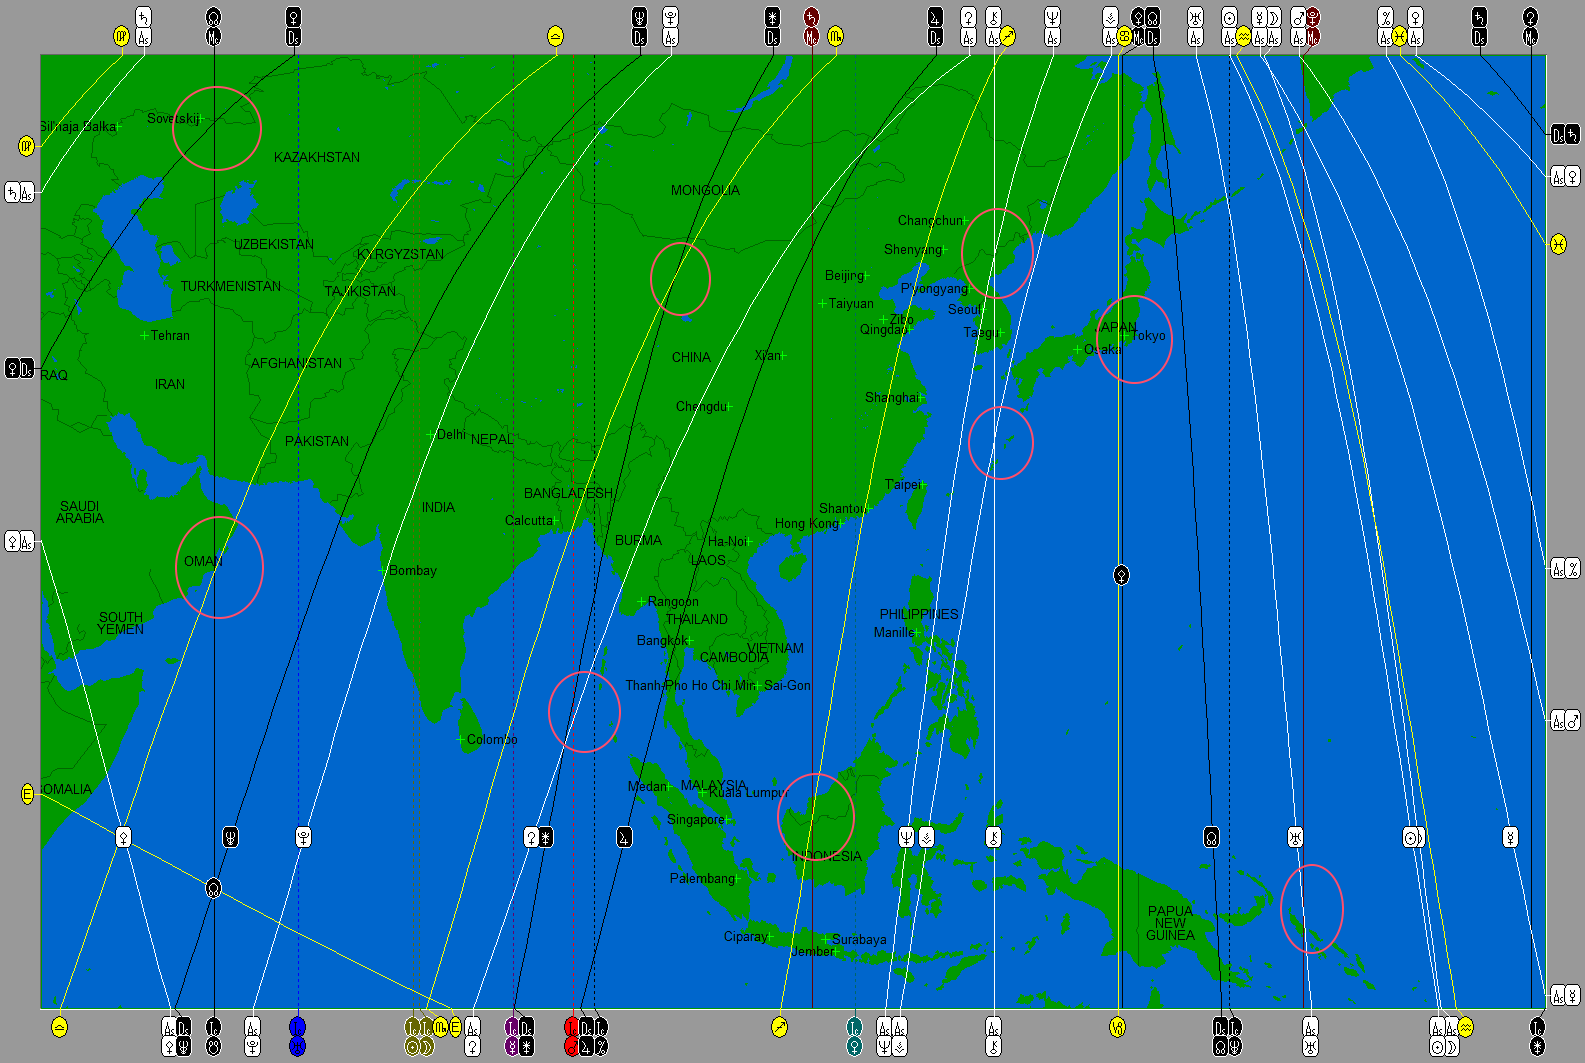 SE Asia Map (zoomout) for New Moon 2015-04-18 (revised)